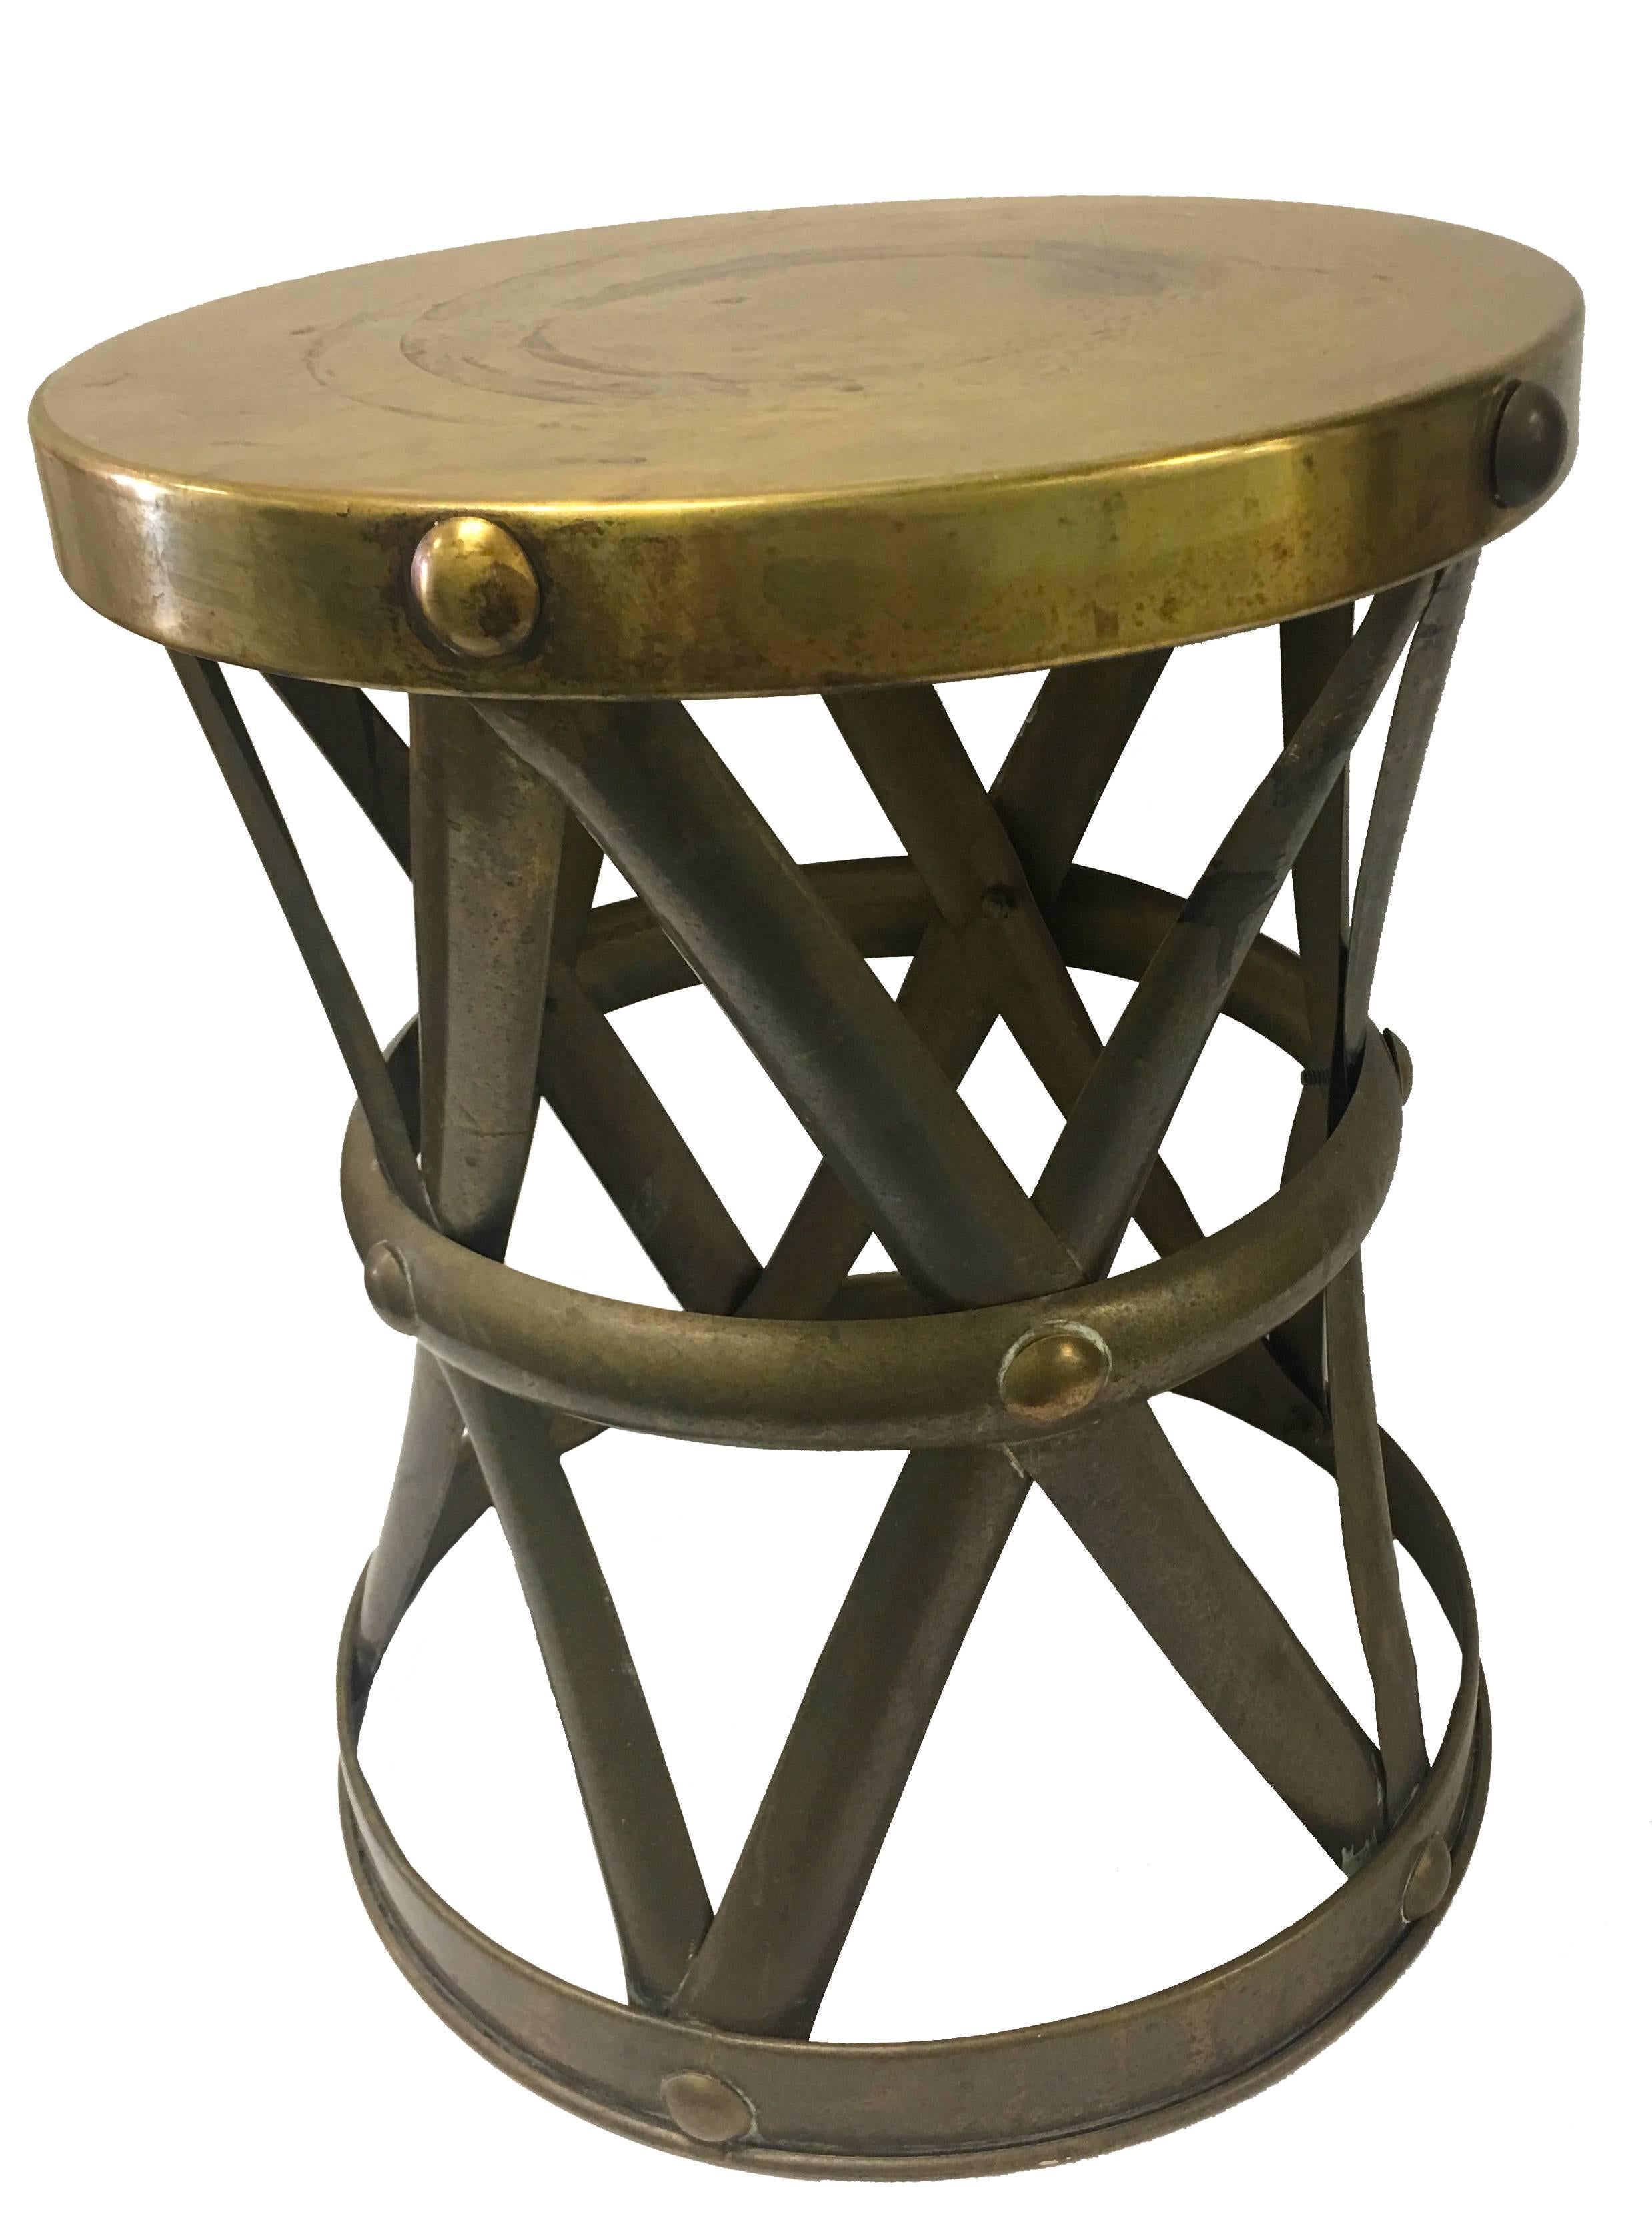 Brass X-base drum stool. Stamped 'Made in Hong Kong'. Overall unpolished as found patina.